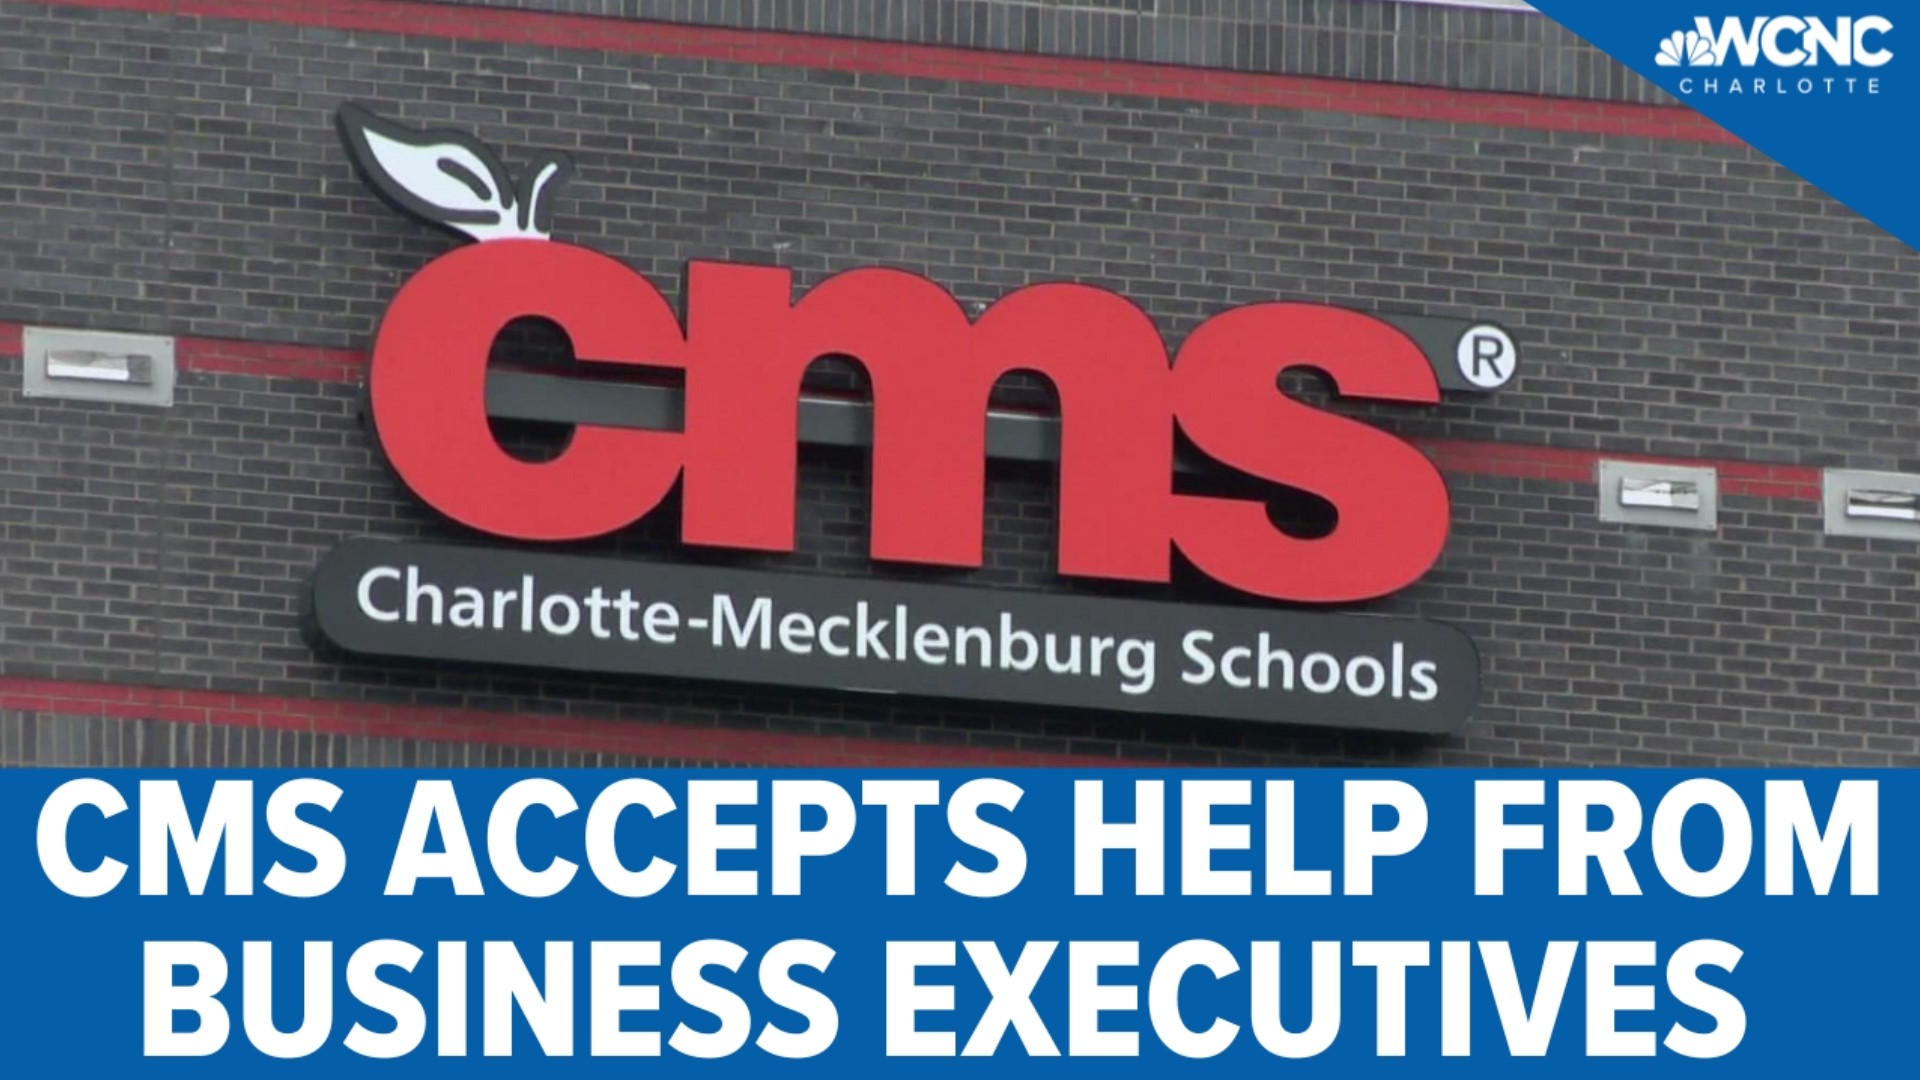 After a slow start to several major programs at CMS, the district accepted outside help from business executives in the Charlotte area this summer.